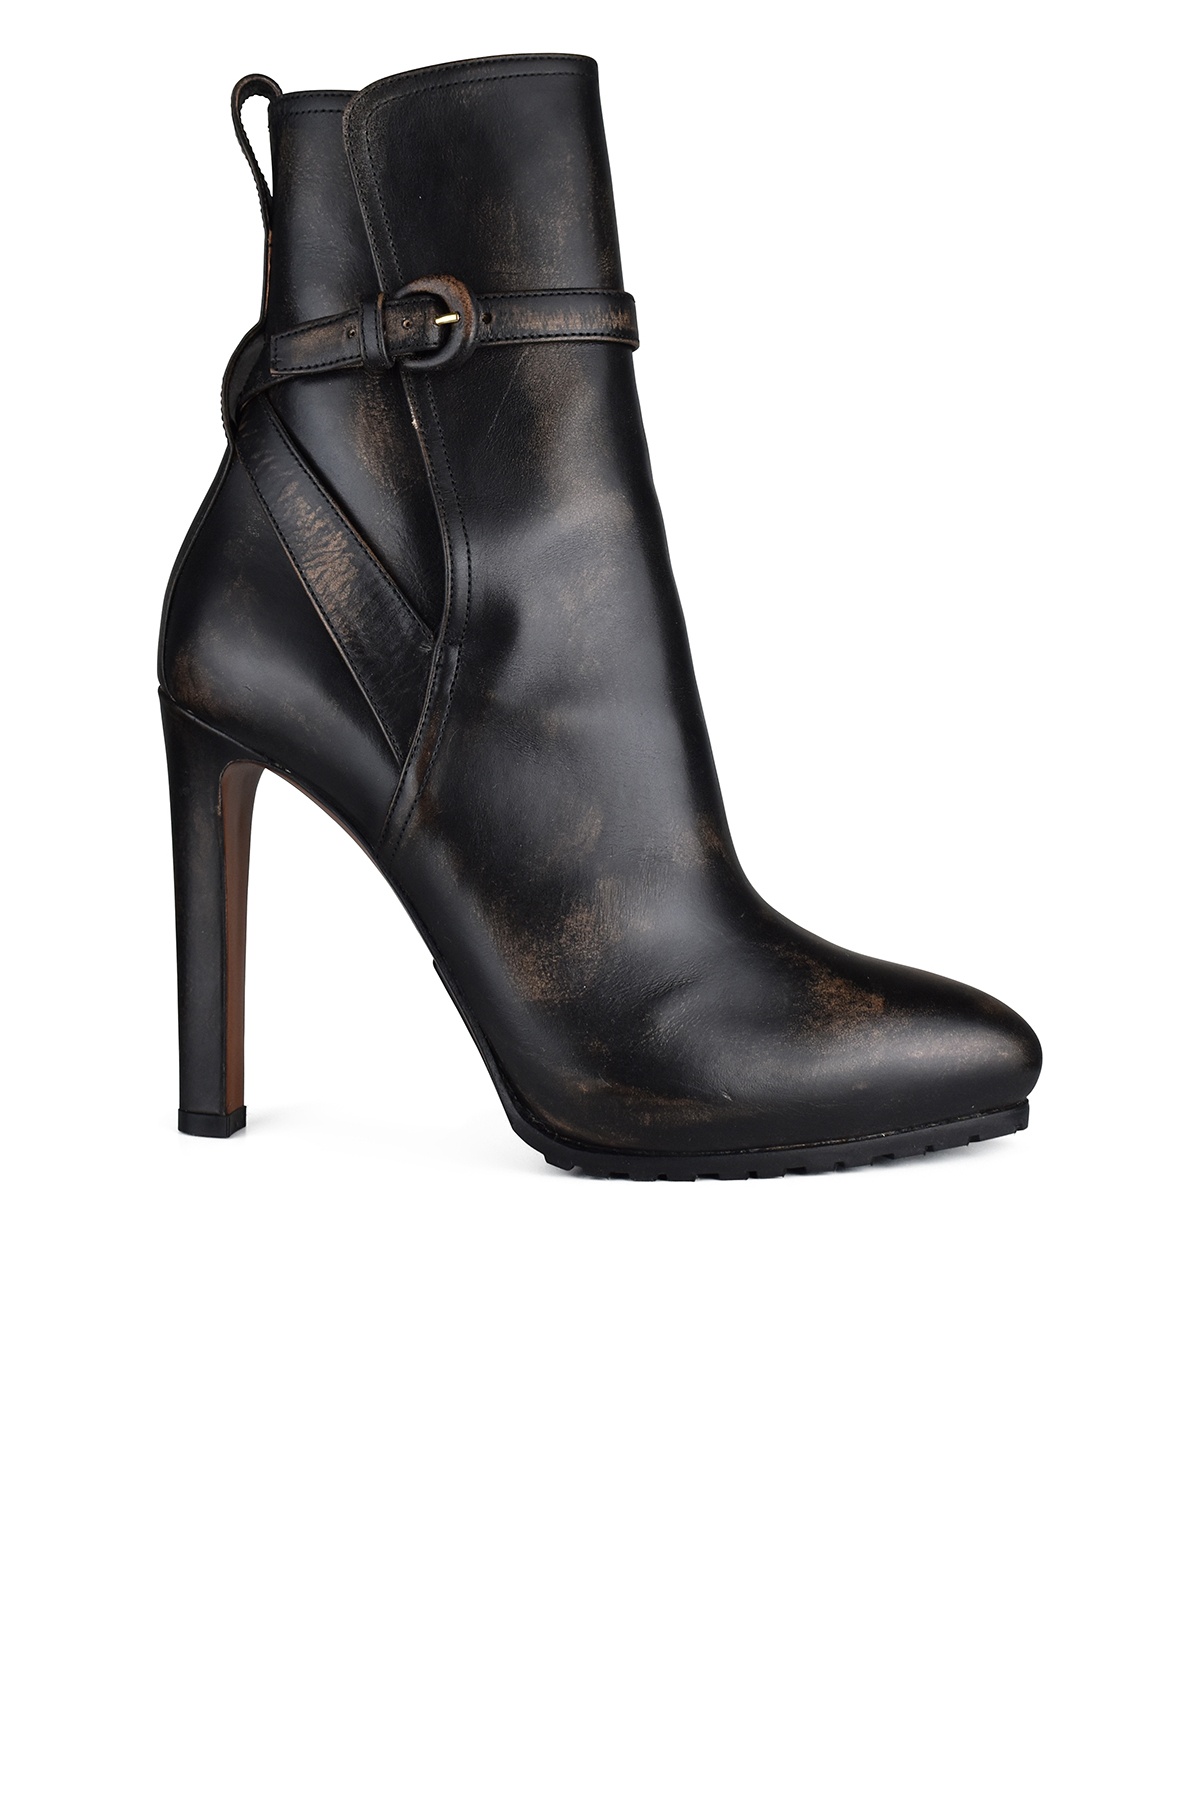 Recelle Boots - 1